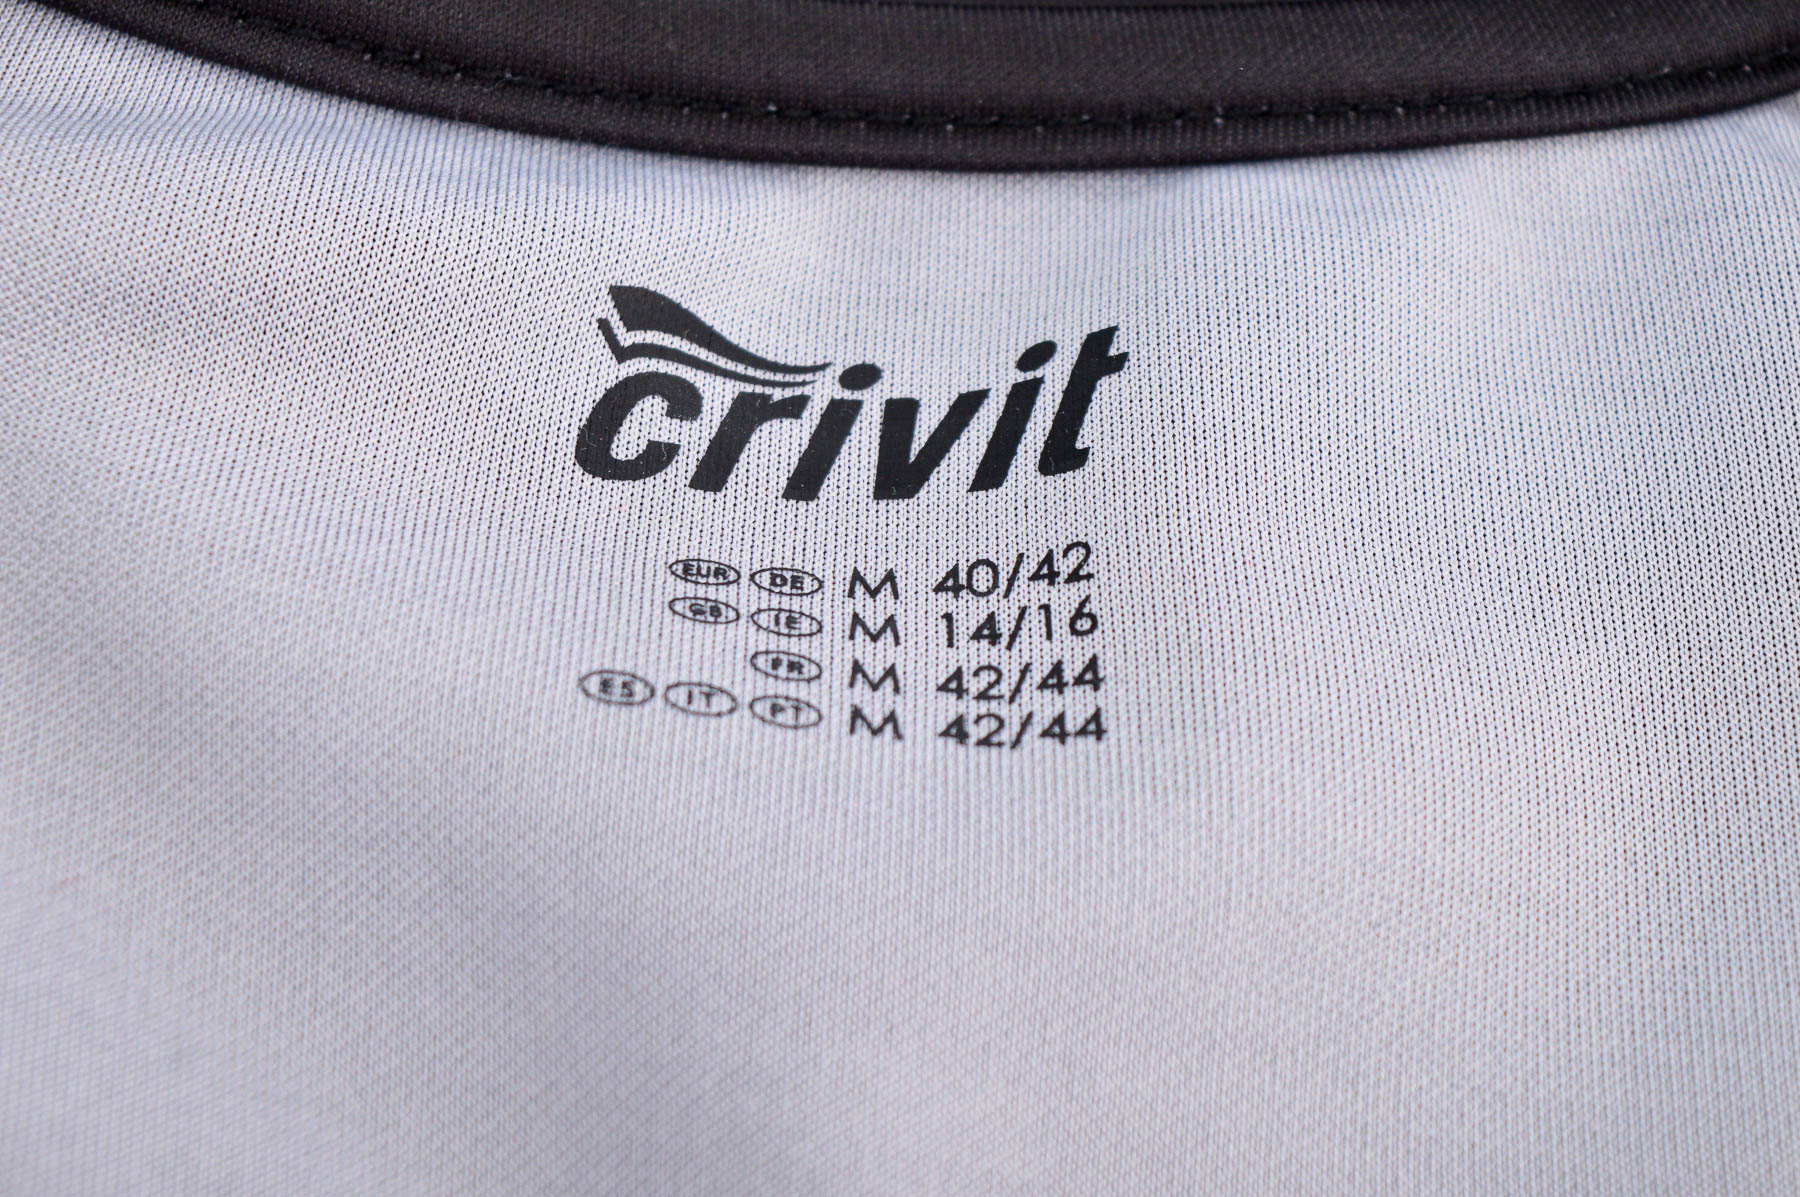 Female sports top for cycling - Crivit - 2